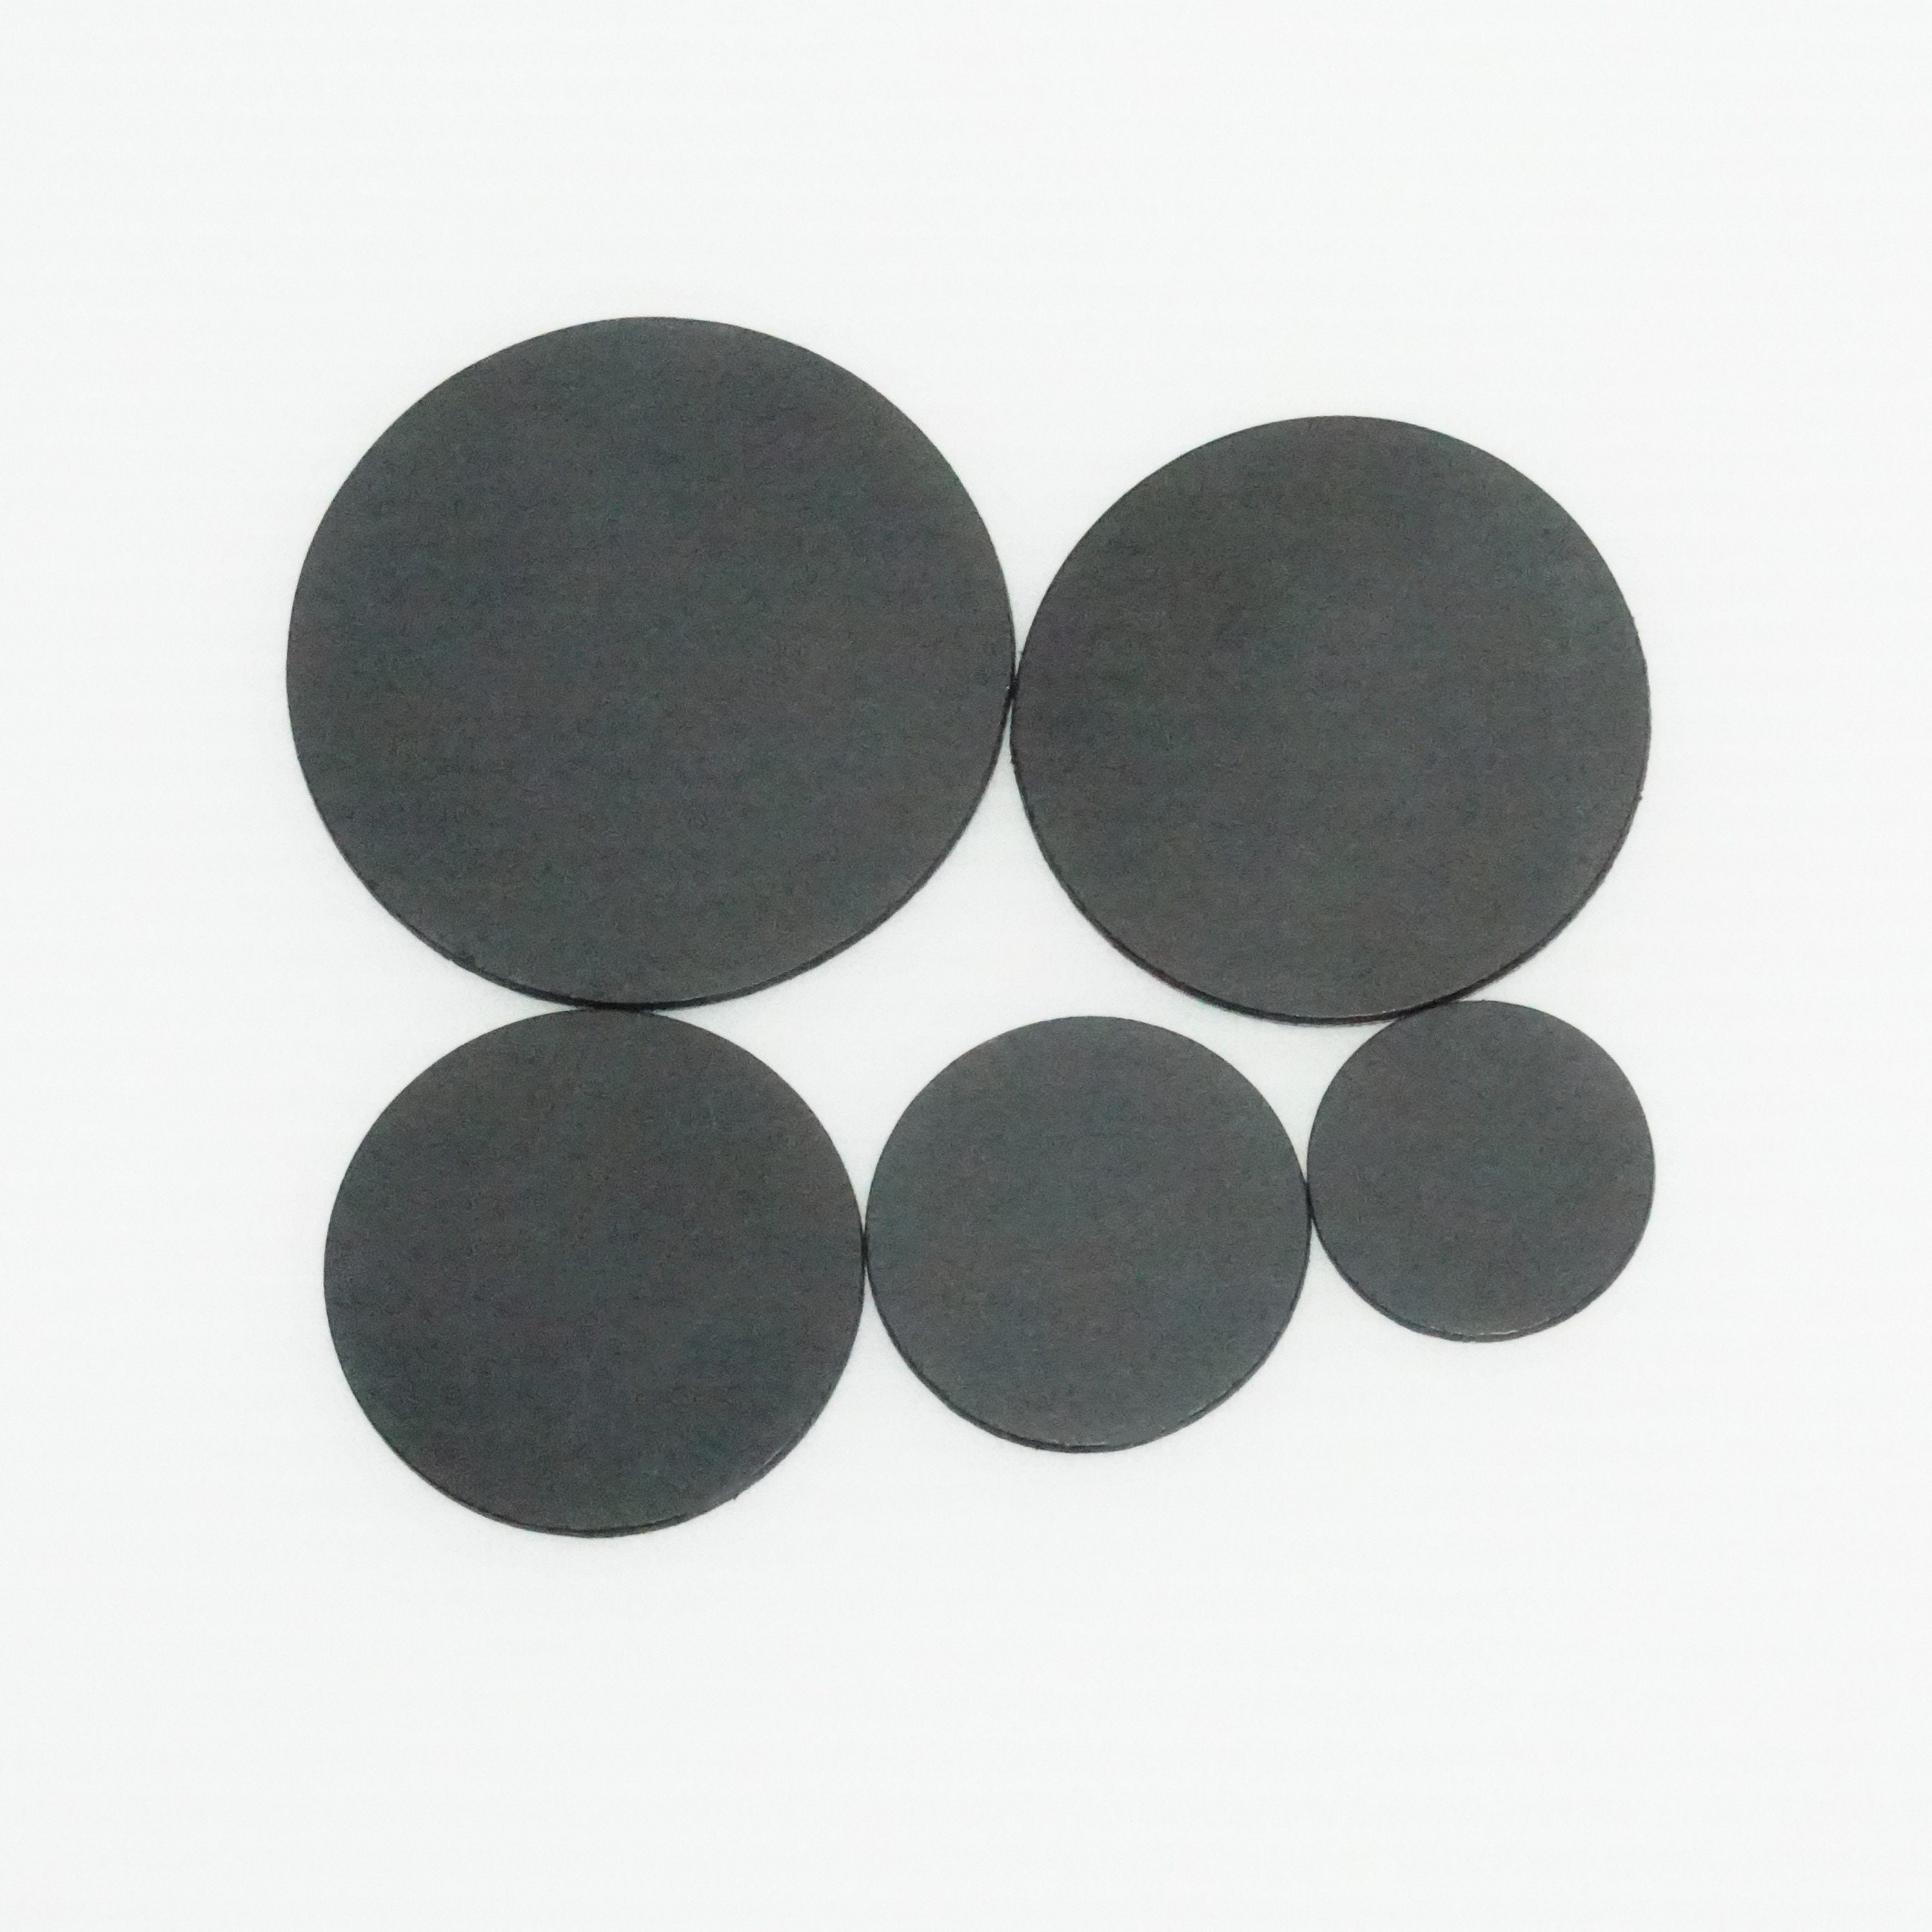 MAGNET TOOLS: 1 pack of 100 Adhesive Magnet Dots .75 (20mm) (b)